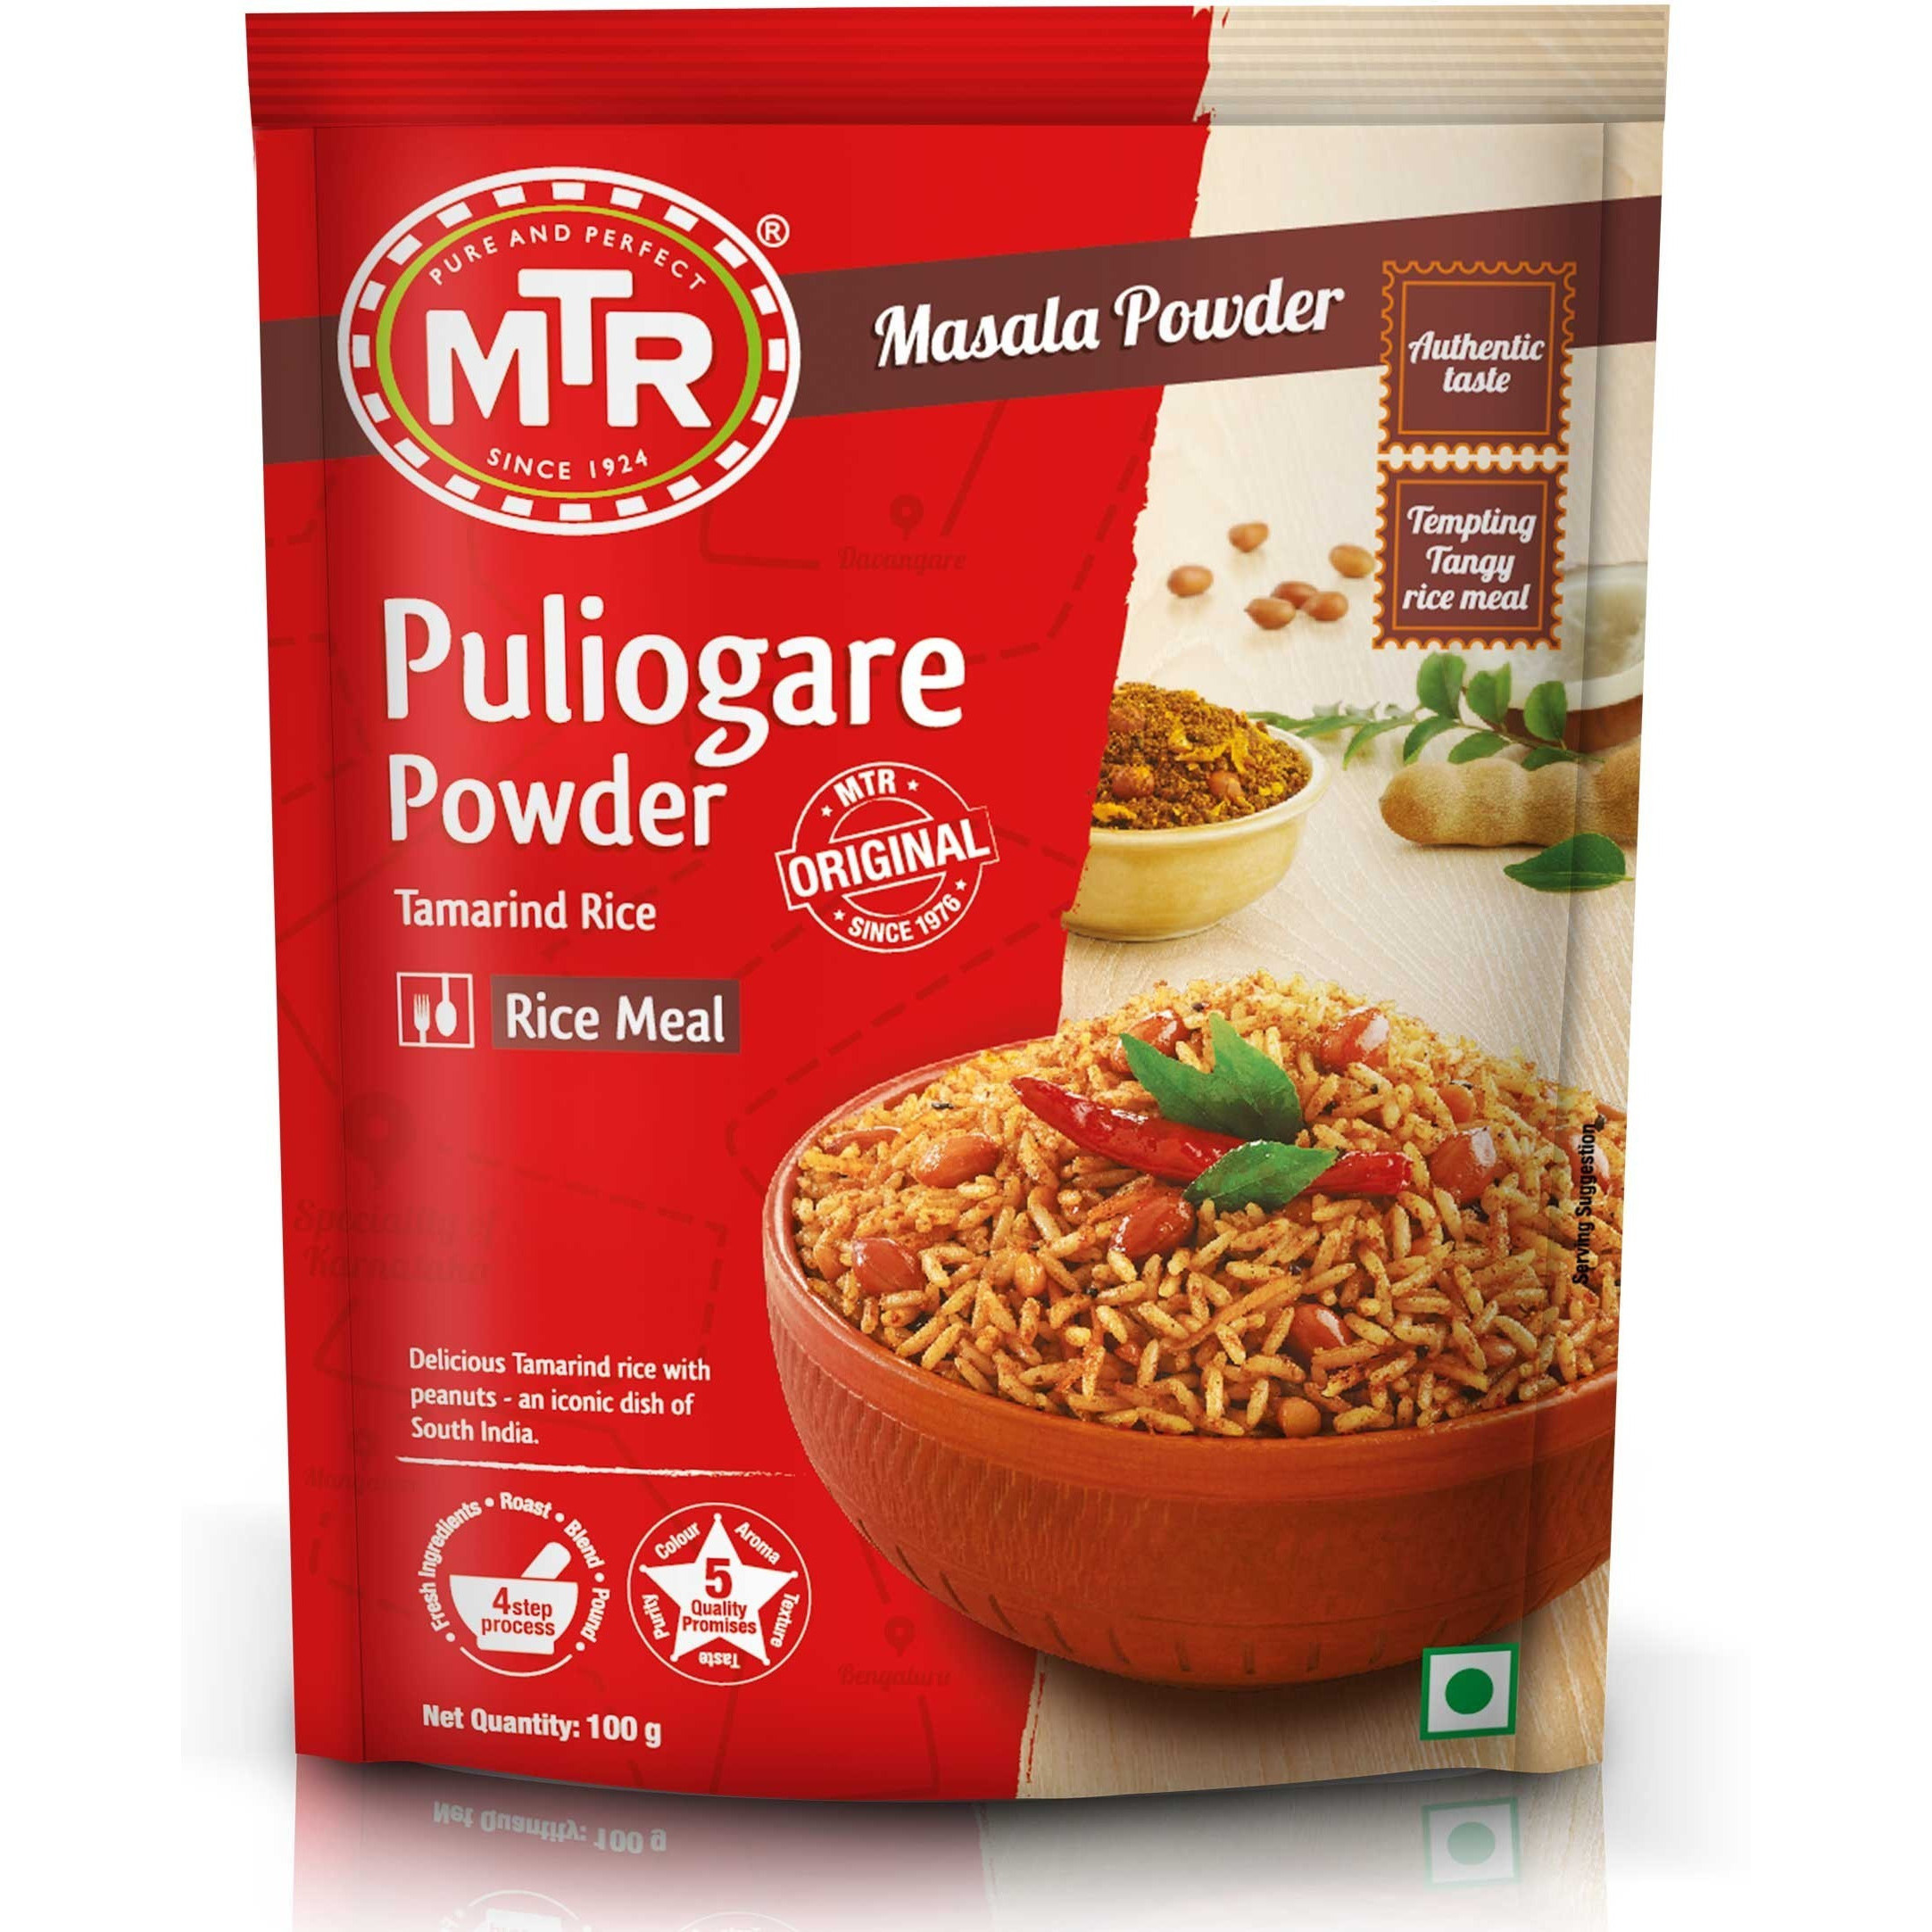 Pack of 3 - Mtr Puliogare Powder - 201 Gm (7.05 Oz)